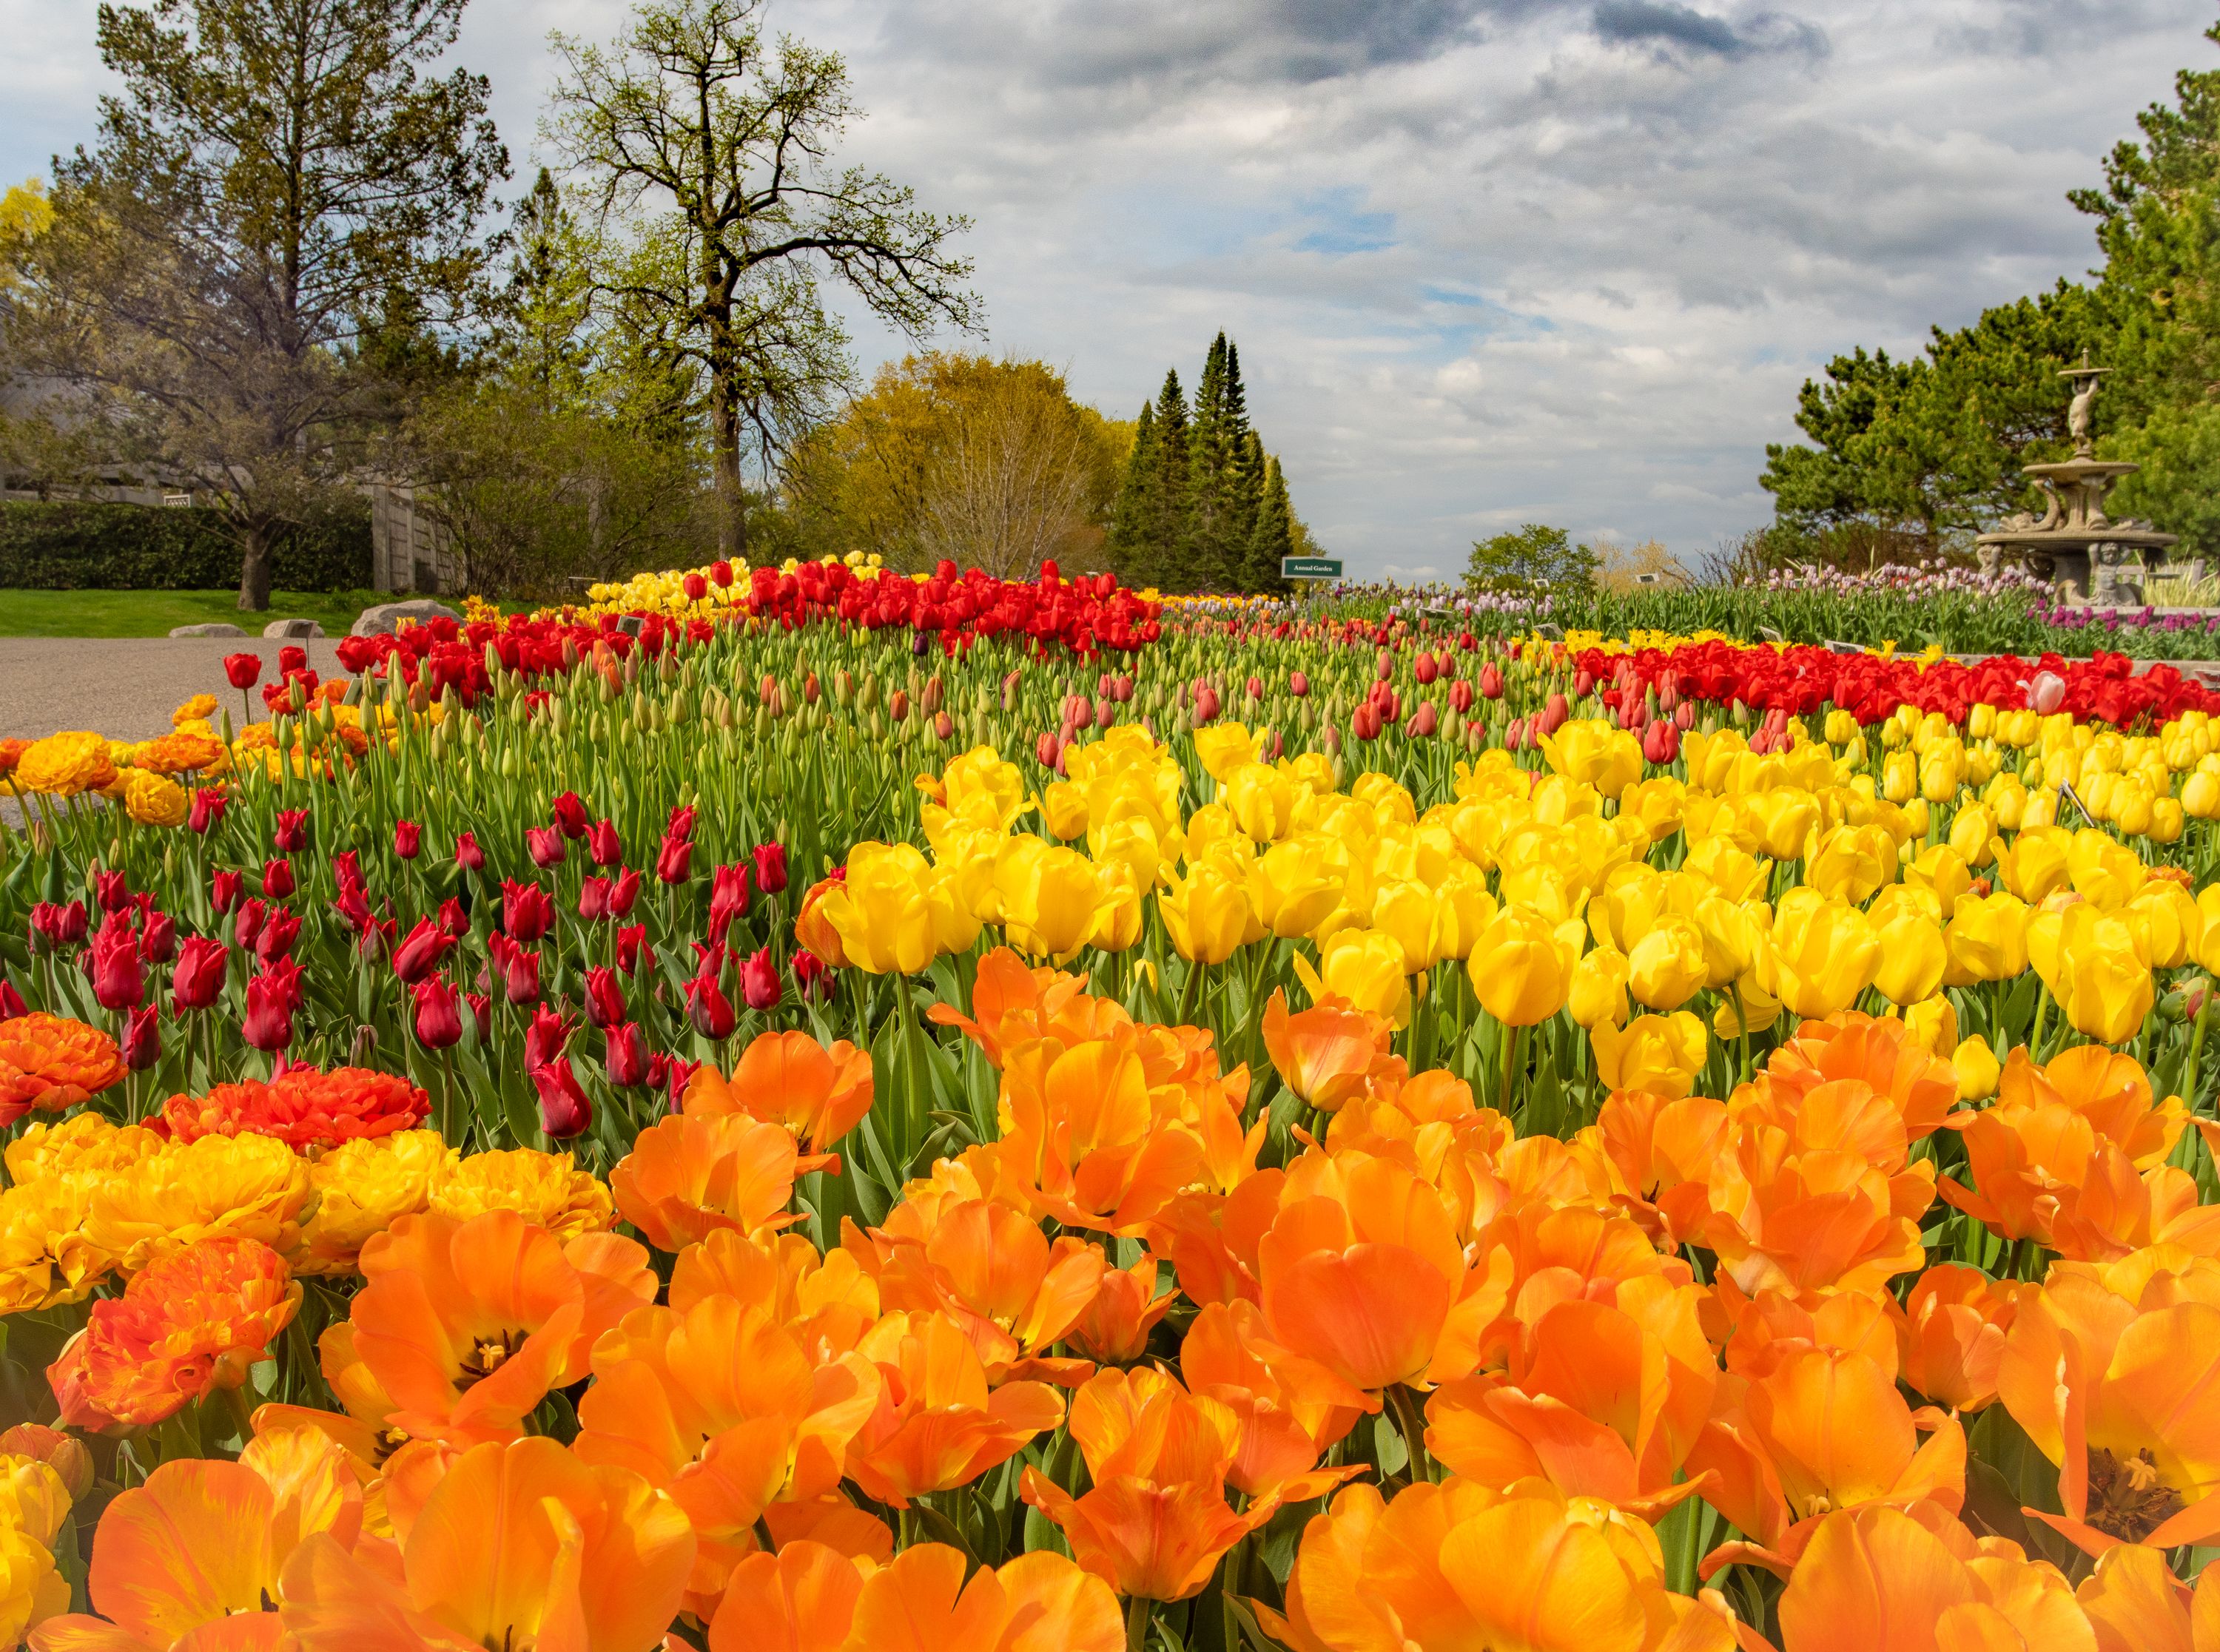 A large garden of orange, red and yellow tulips.